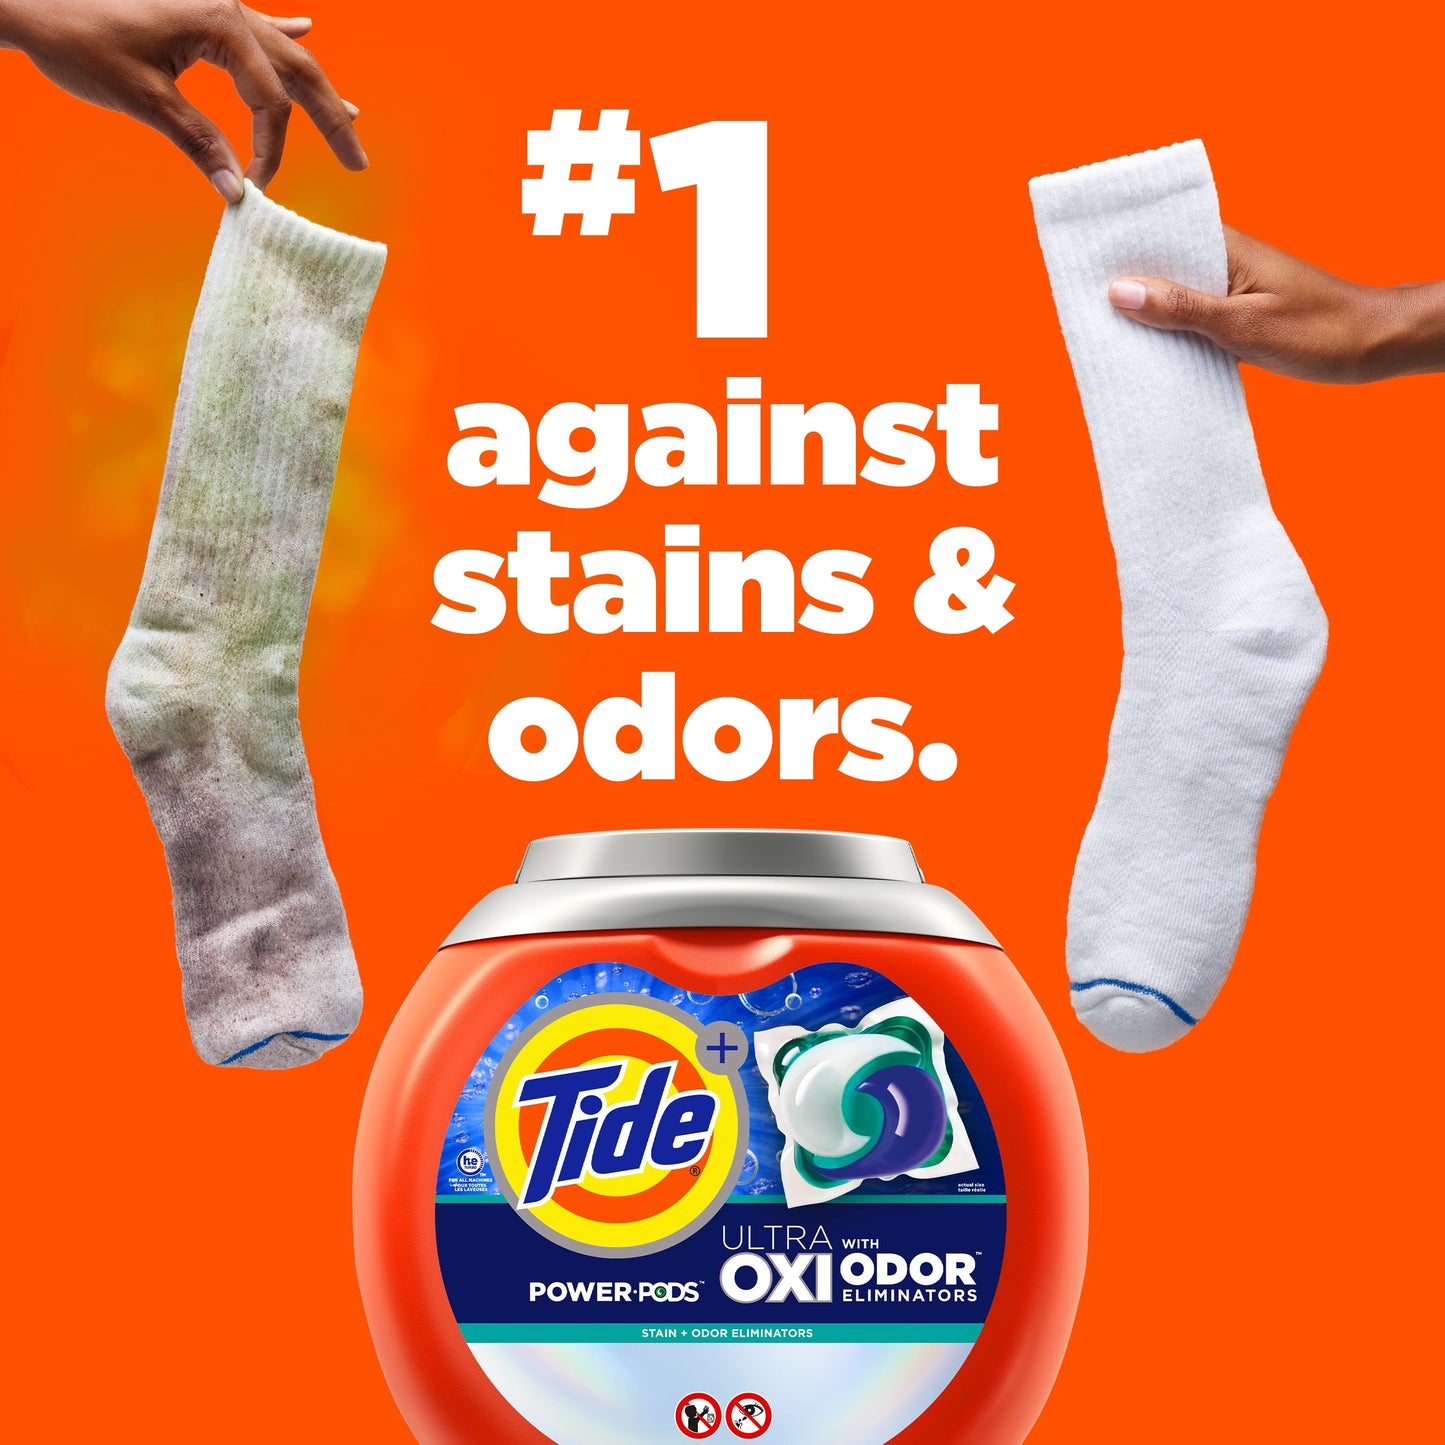 Tide Power Pods Laundry Detergent Soap Packs with Ultra Oxi, 45 Ct